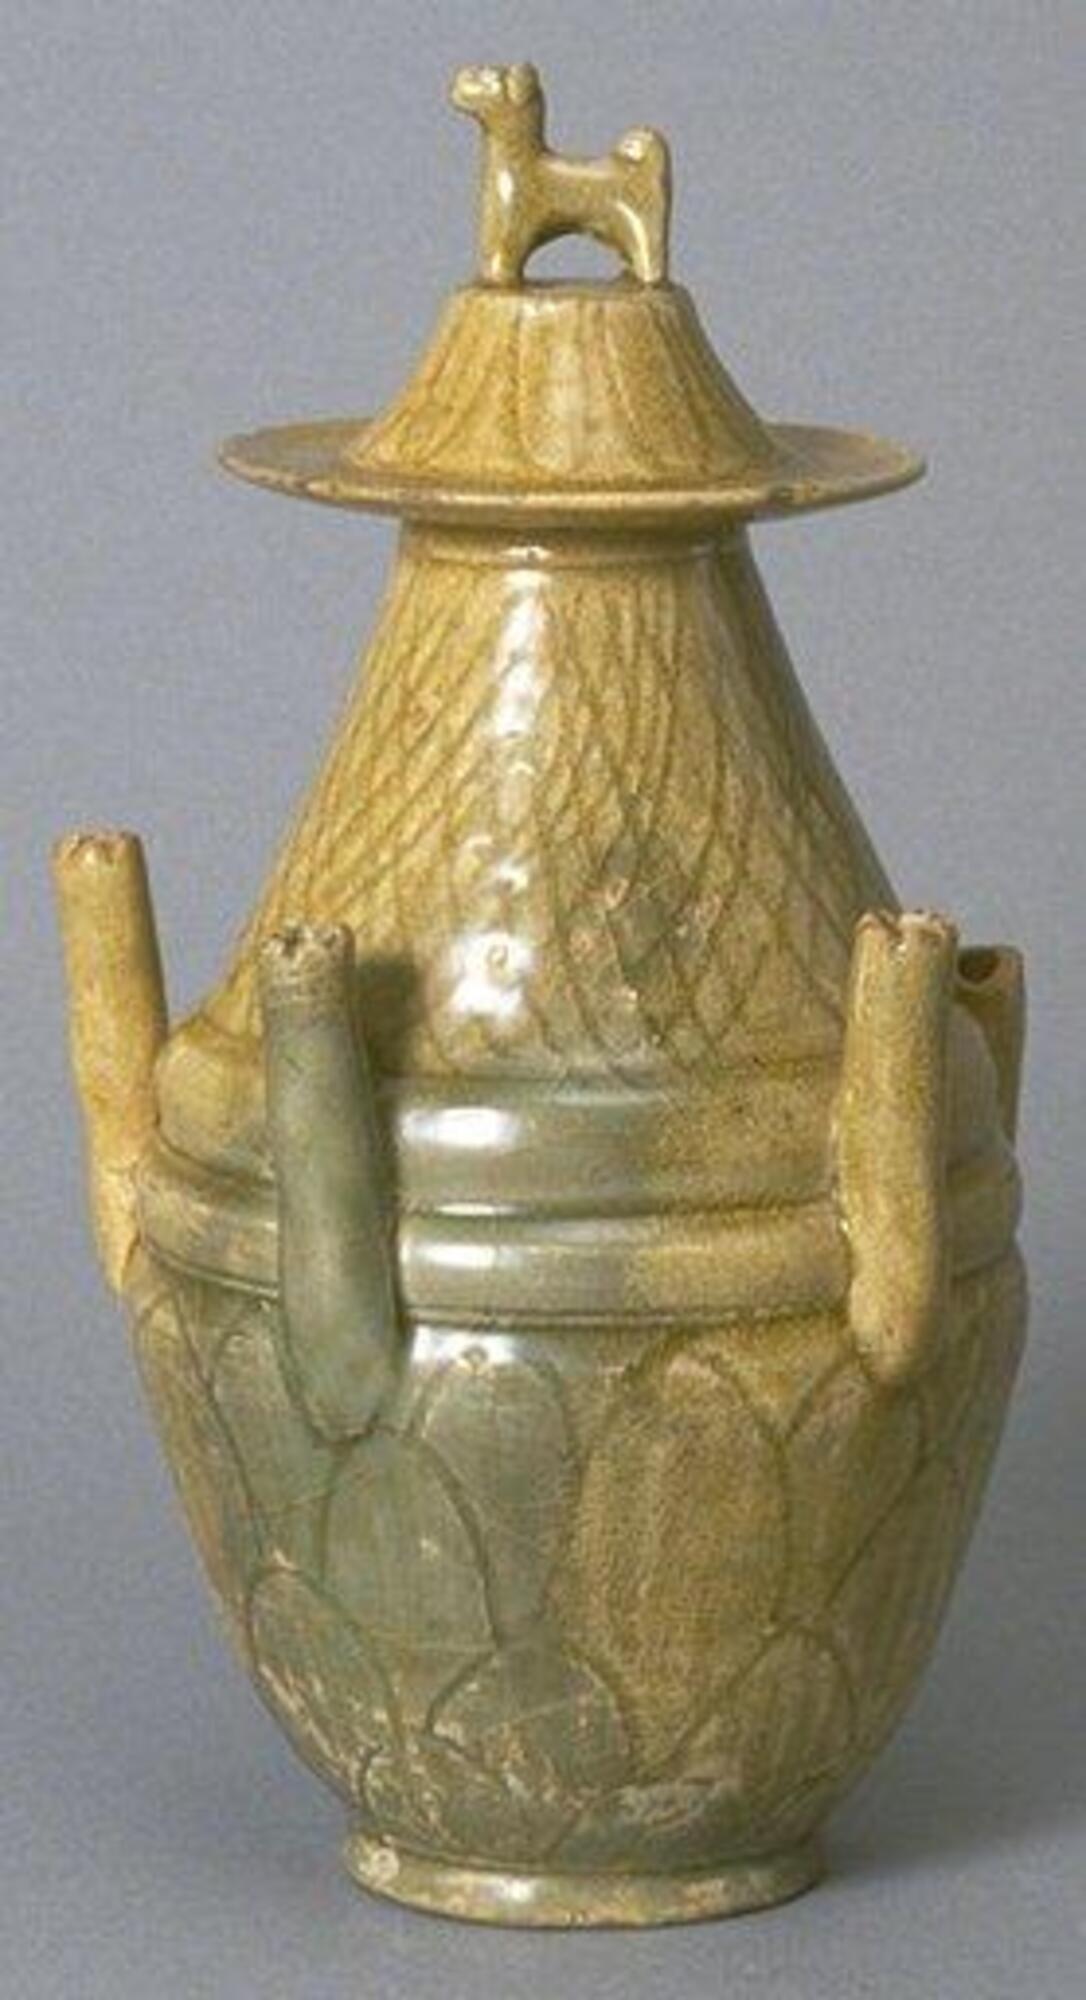 A buff stoneware jar rising up from a tall foot ring in an elongated globular body with lobes tapering towards the mouth.  There is incised decoration, and five tubes evenly spaced and protruding upwards from the belly. The mouth is covered with a high truncated conical lid, incised, and topped with a dog finial.  It is covered in an olive green celadon glaze.  On the lid is accession number 1987/2.46B.